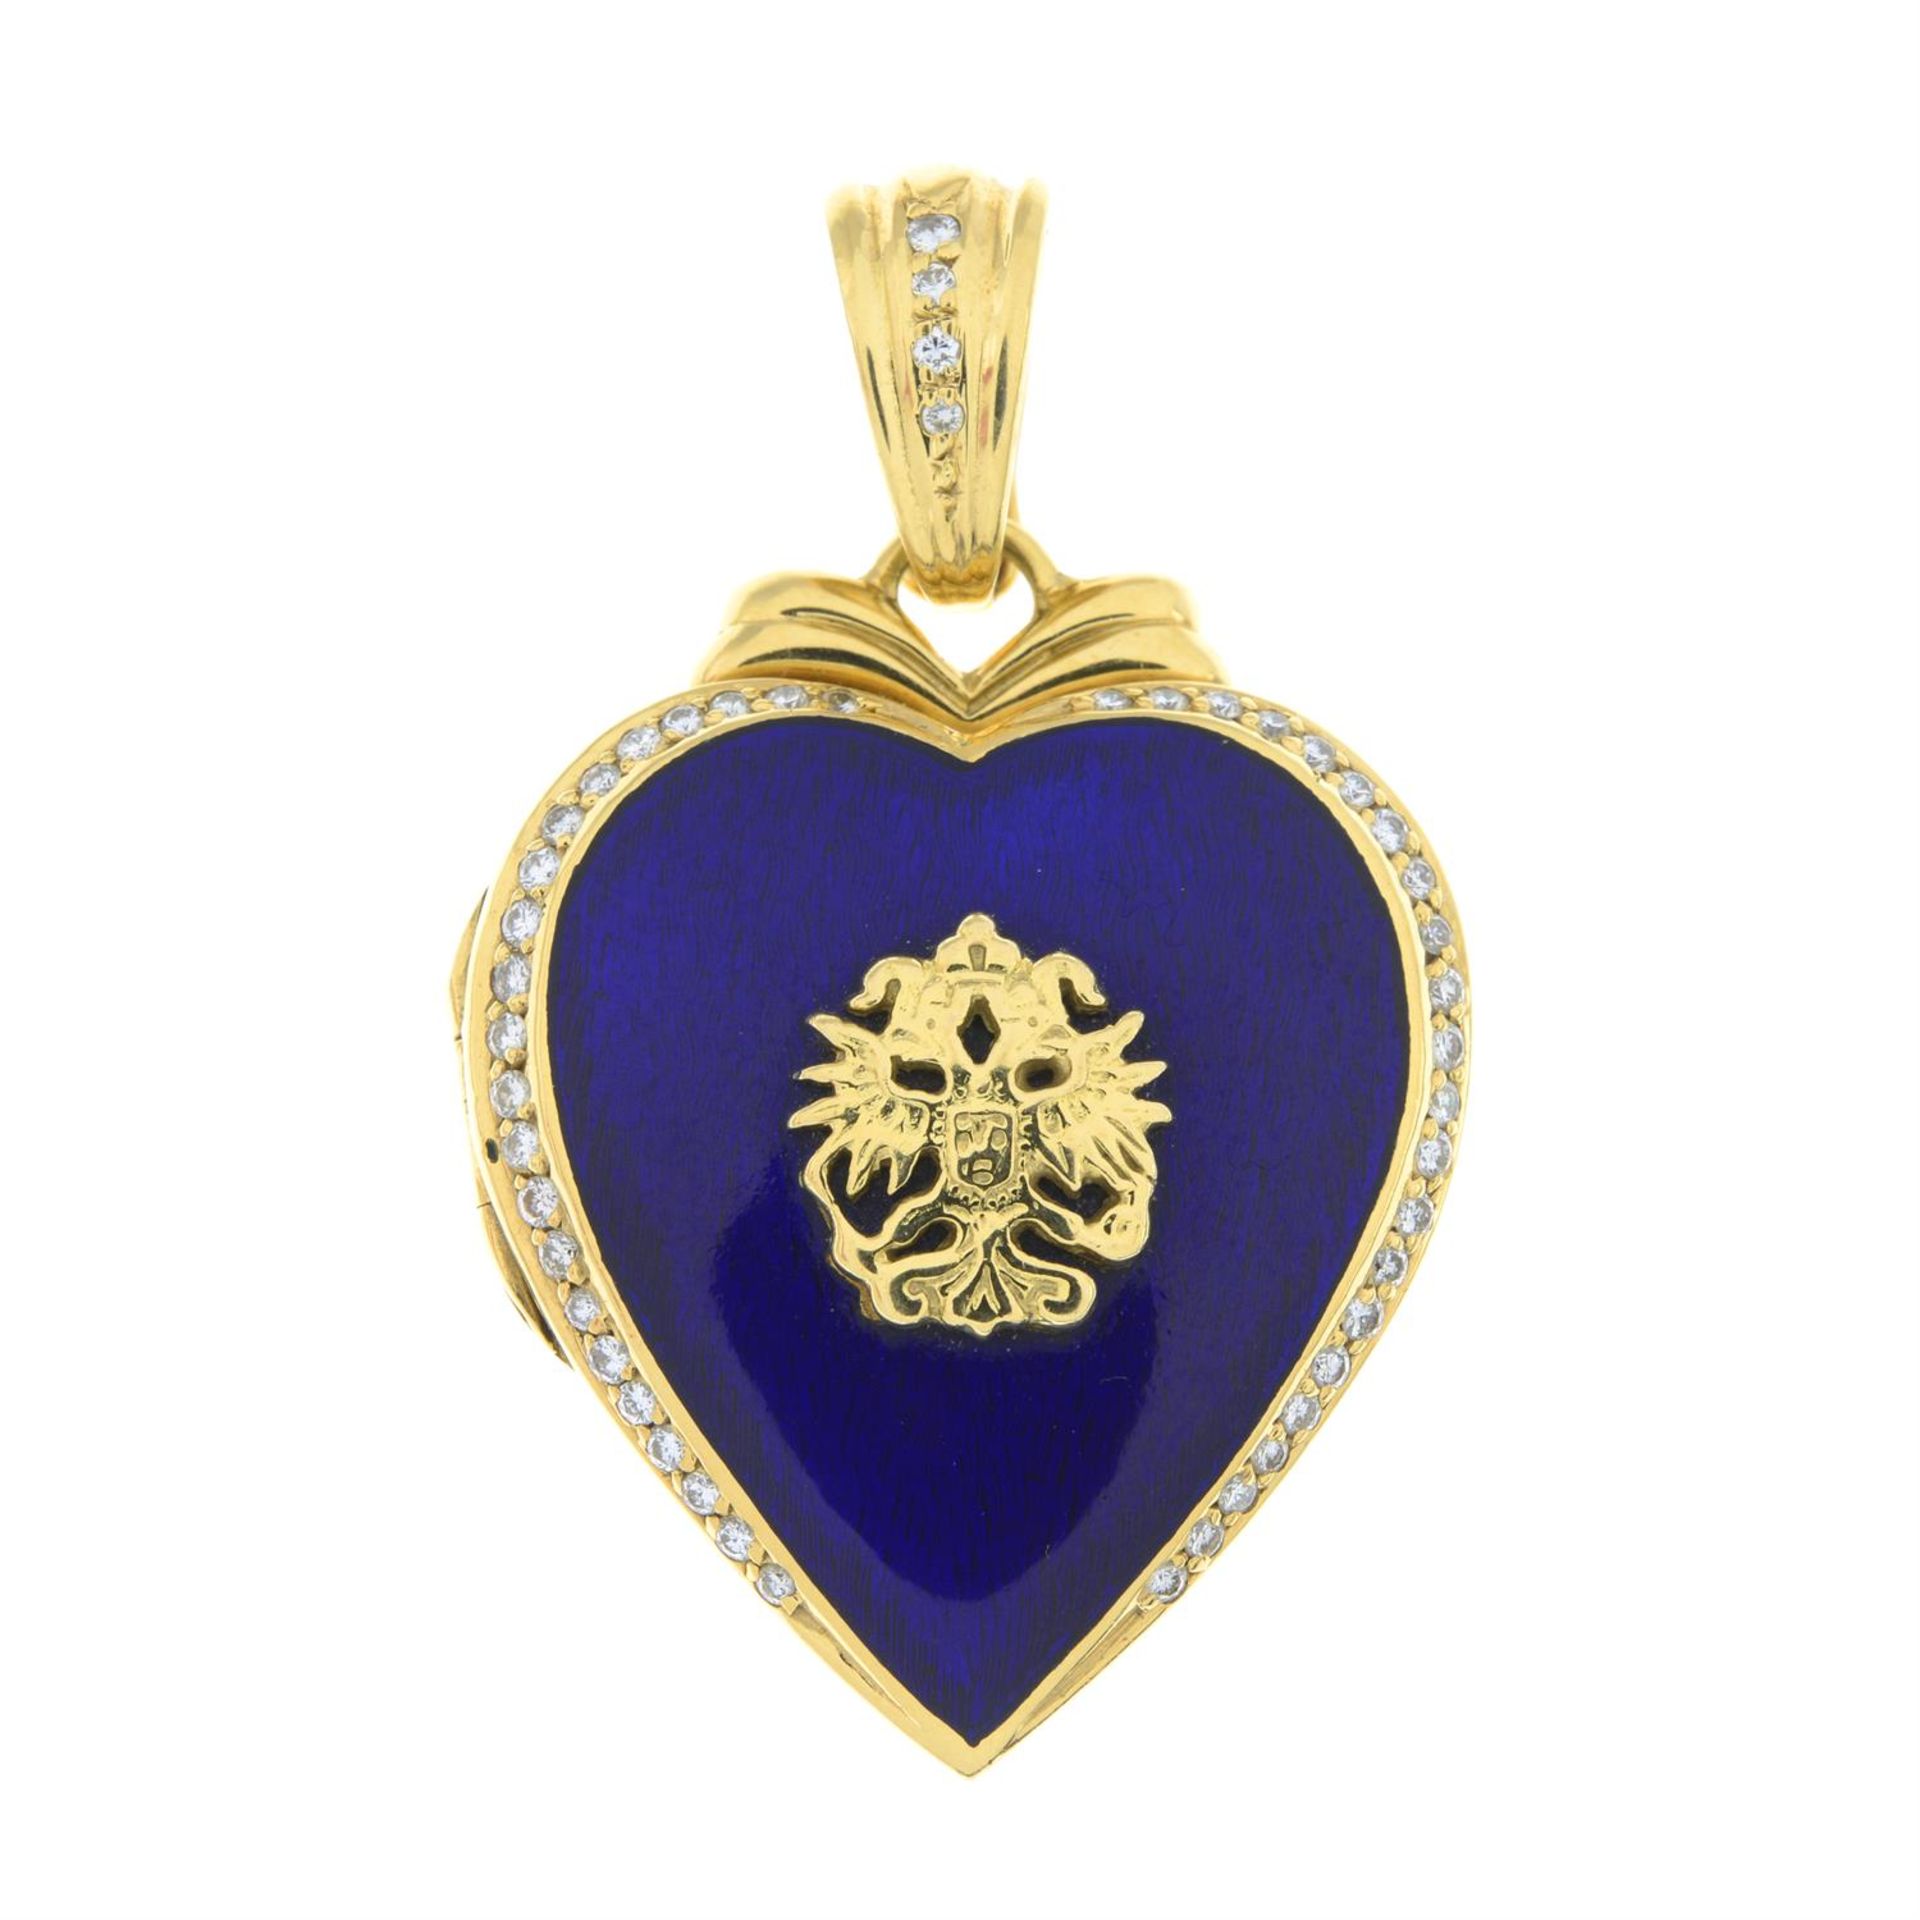 Diamond and enamel heart locket, by Fabergé - Image 2 of 6